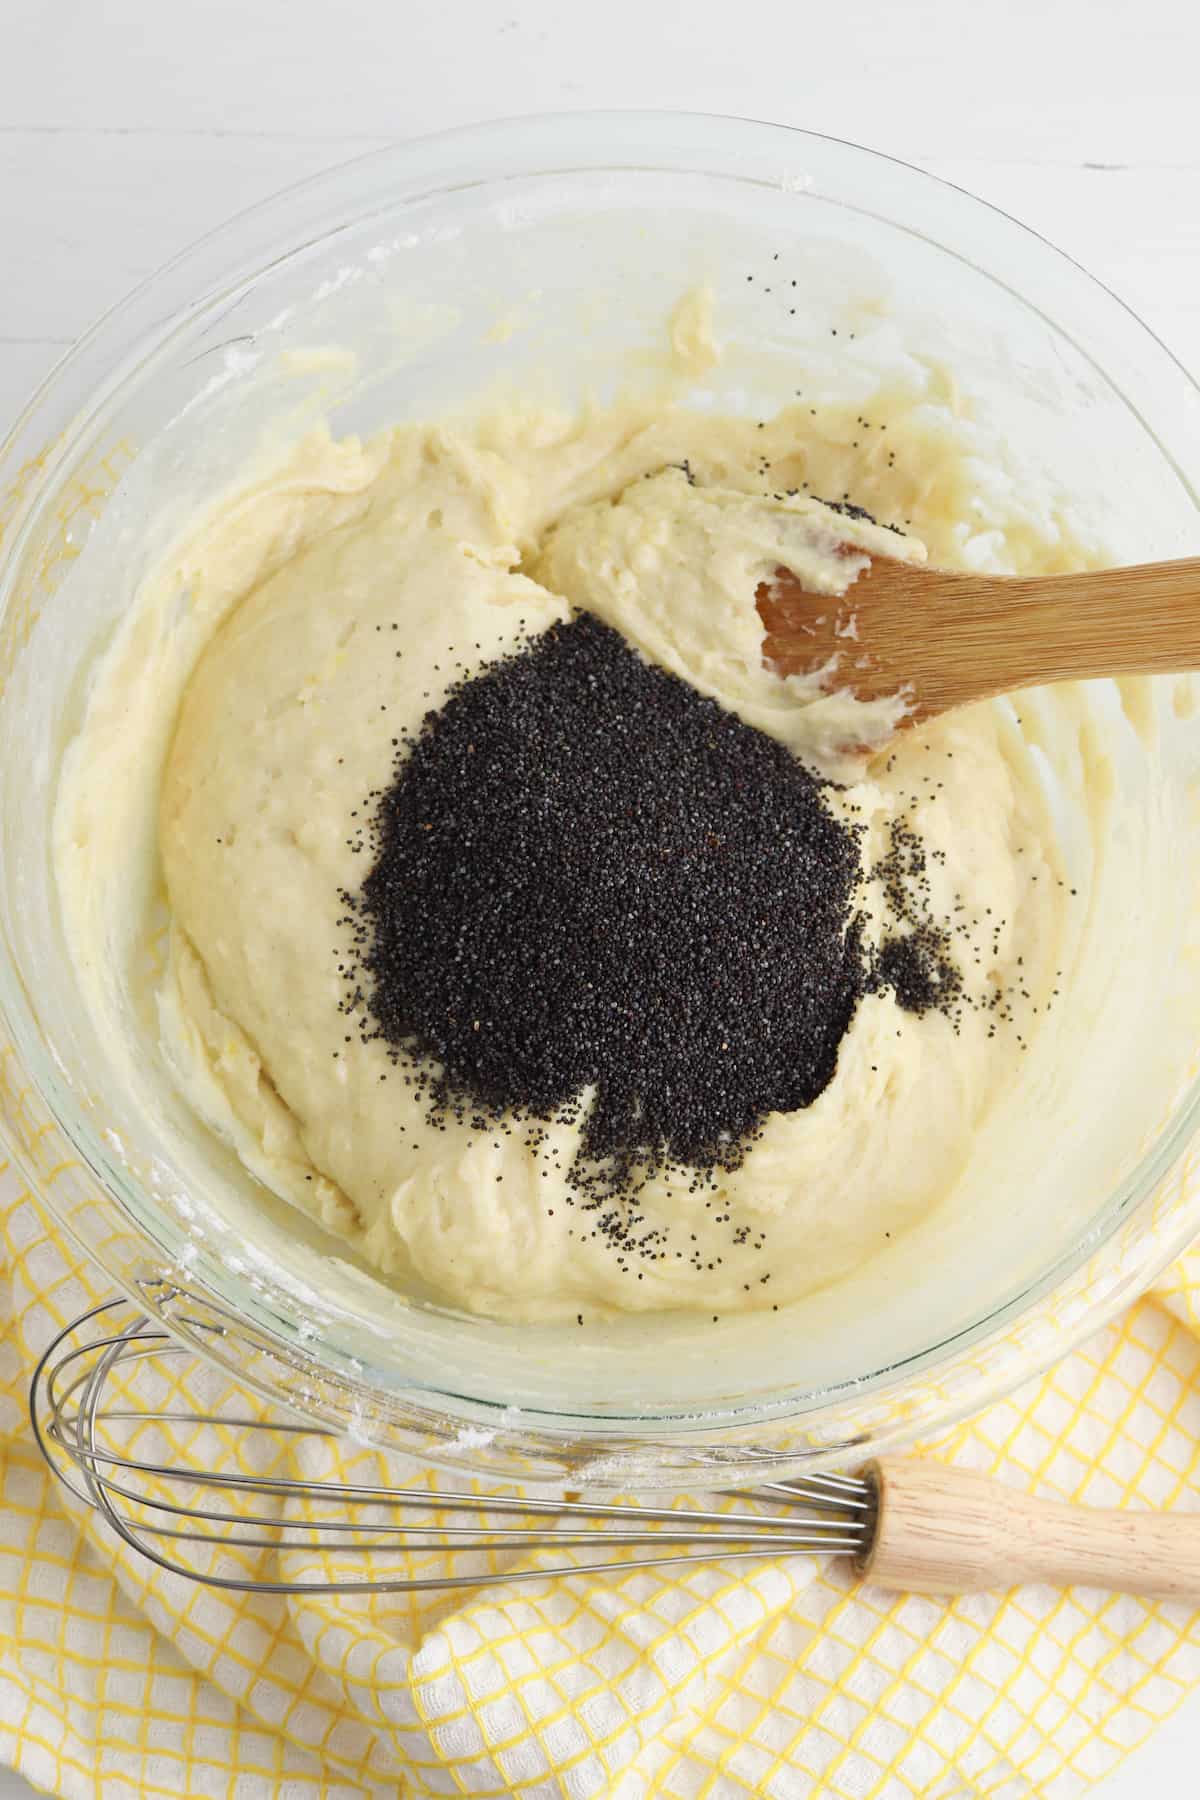 Batter with poppy seeds.